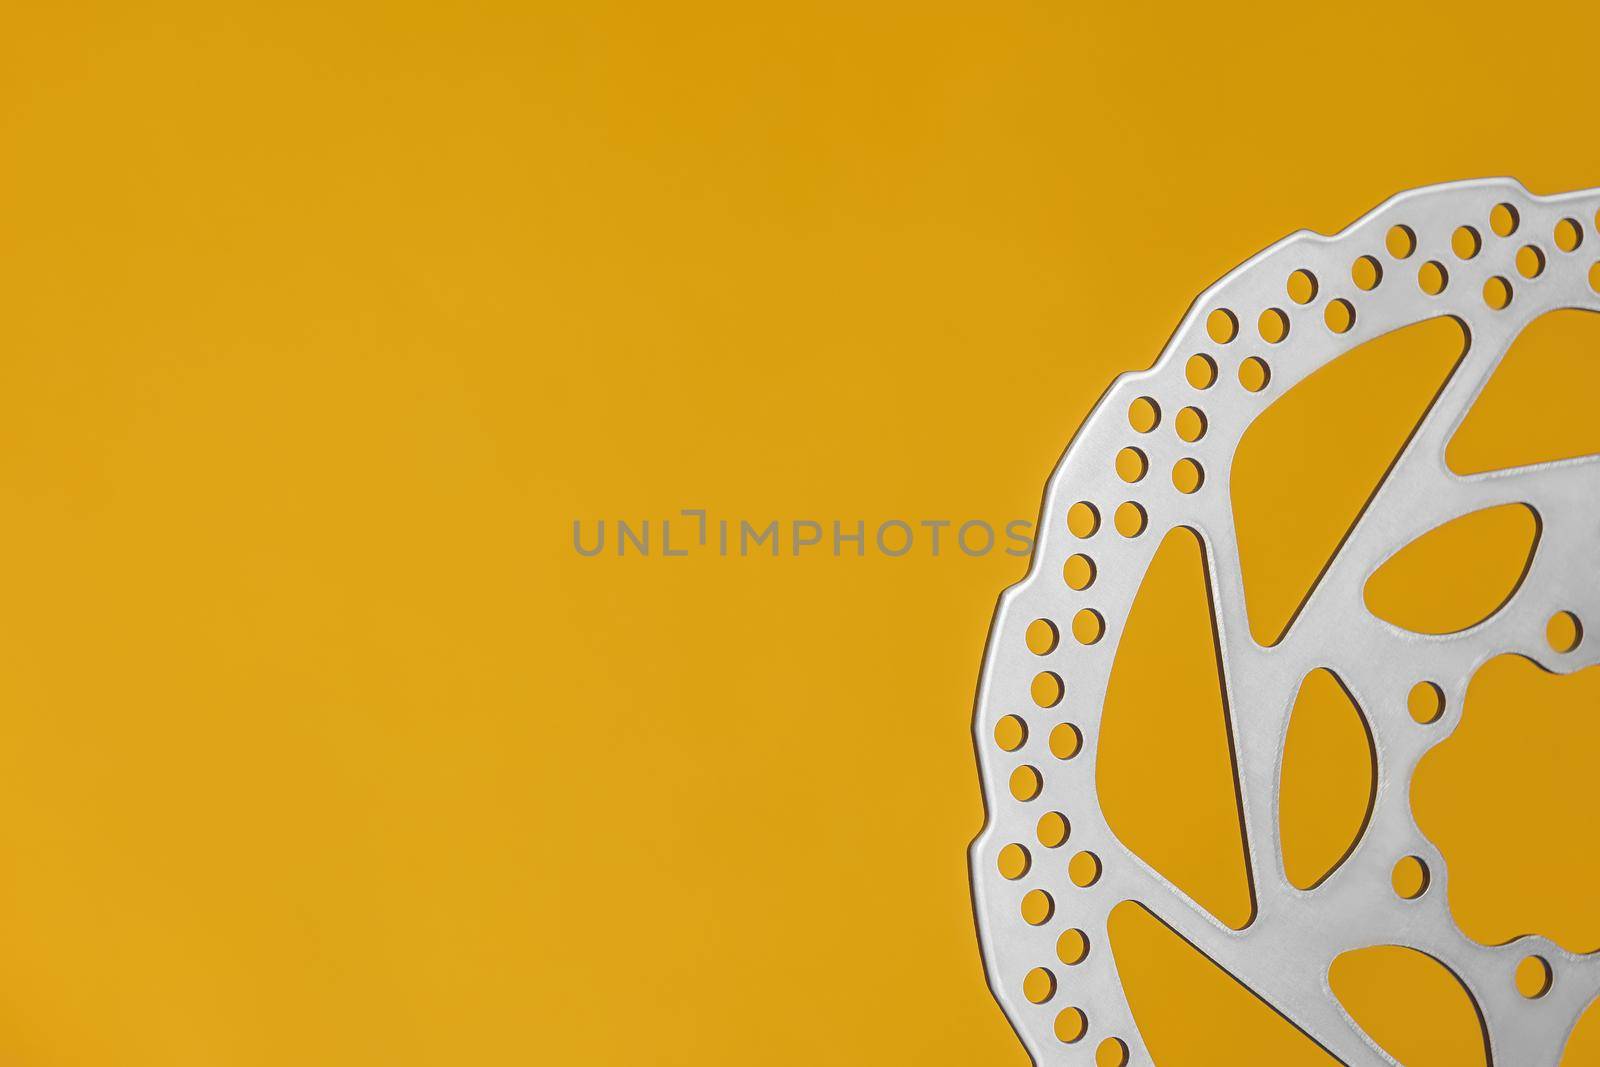 Half of new brake disc for bicycle hydraulic brakes with yellow background and copy space.